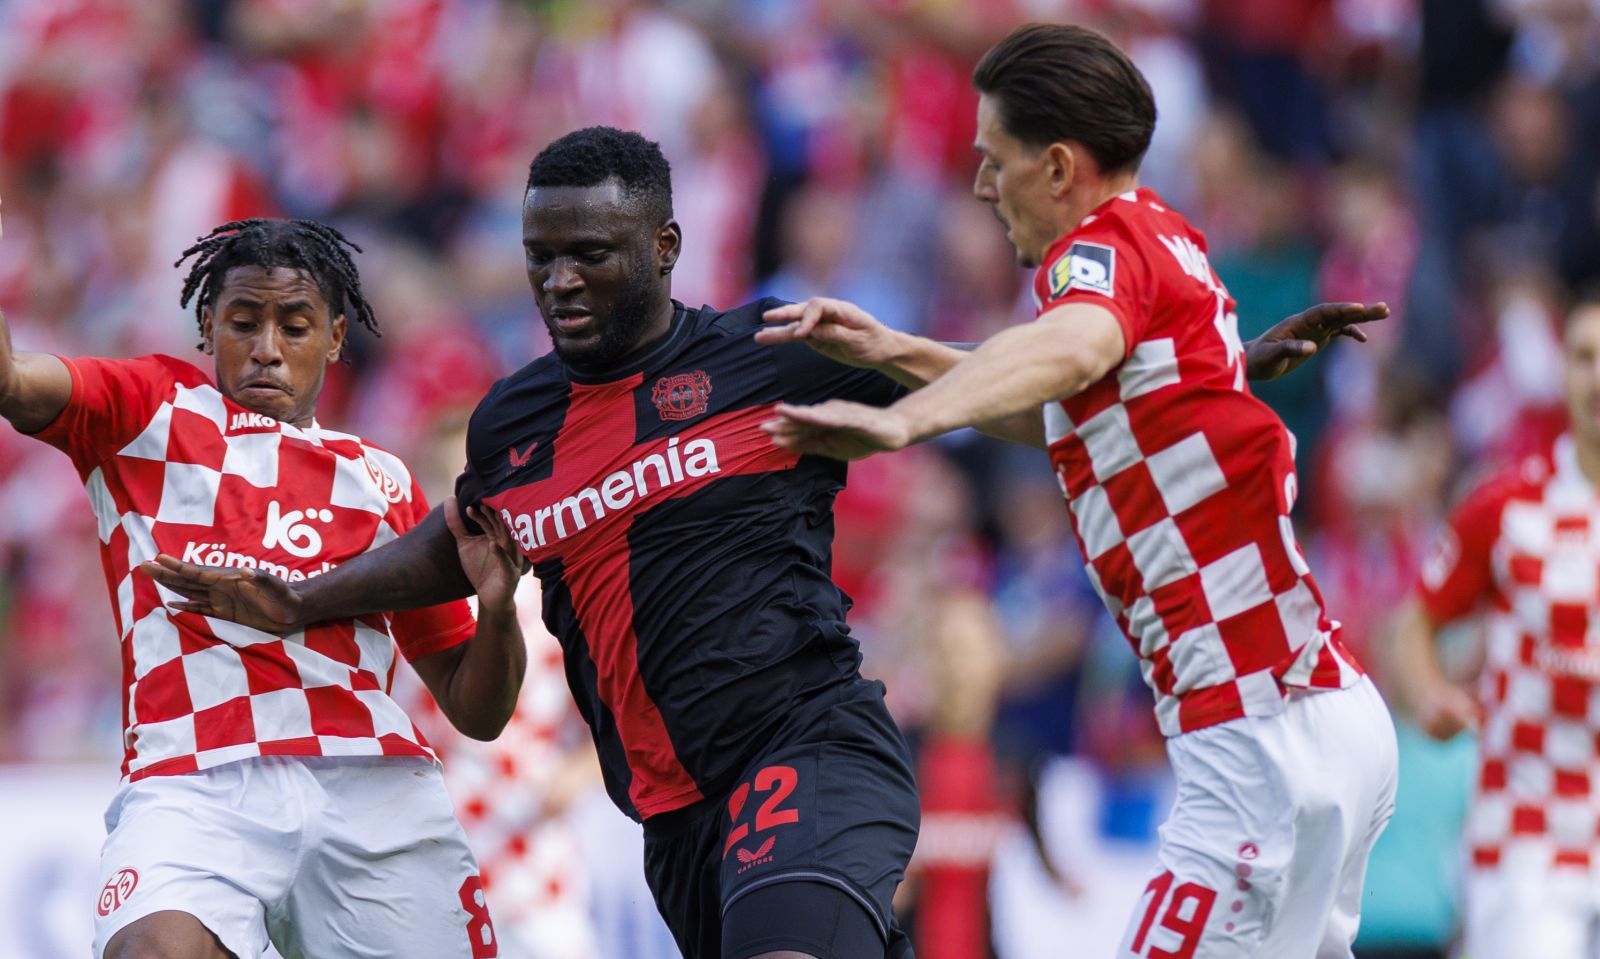 epa10891886 Leverkusen's Victor Boniface (C) in action against Mainz’s Leandro Barreiro (L) and Anthony Caci (R) during the German Bundesliga soccer match between 1. FSV Mainz 05 and Bayer 04 Leverkusen in Mainz, Germany, 30 September 2023.  EPA/CHRISTOPHER NEUNDORF CONDITIONS - ATTENTION: The DFL regulations prohibit any use of photographs as image sequences and/or quasi-video.